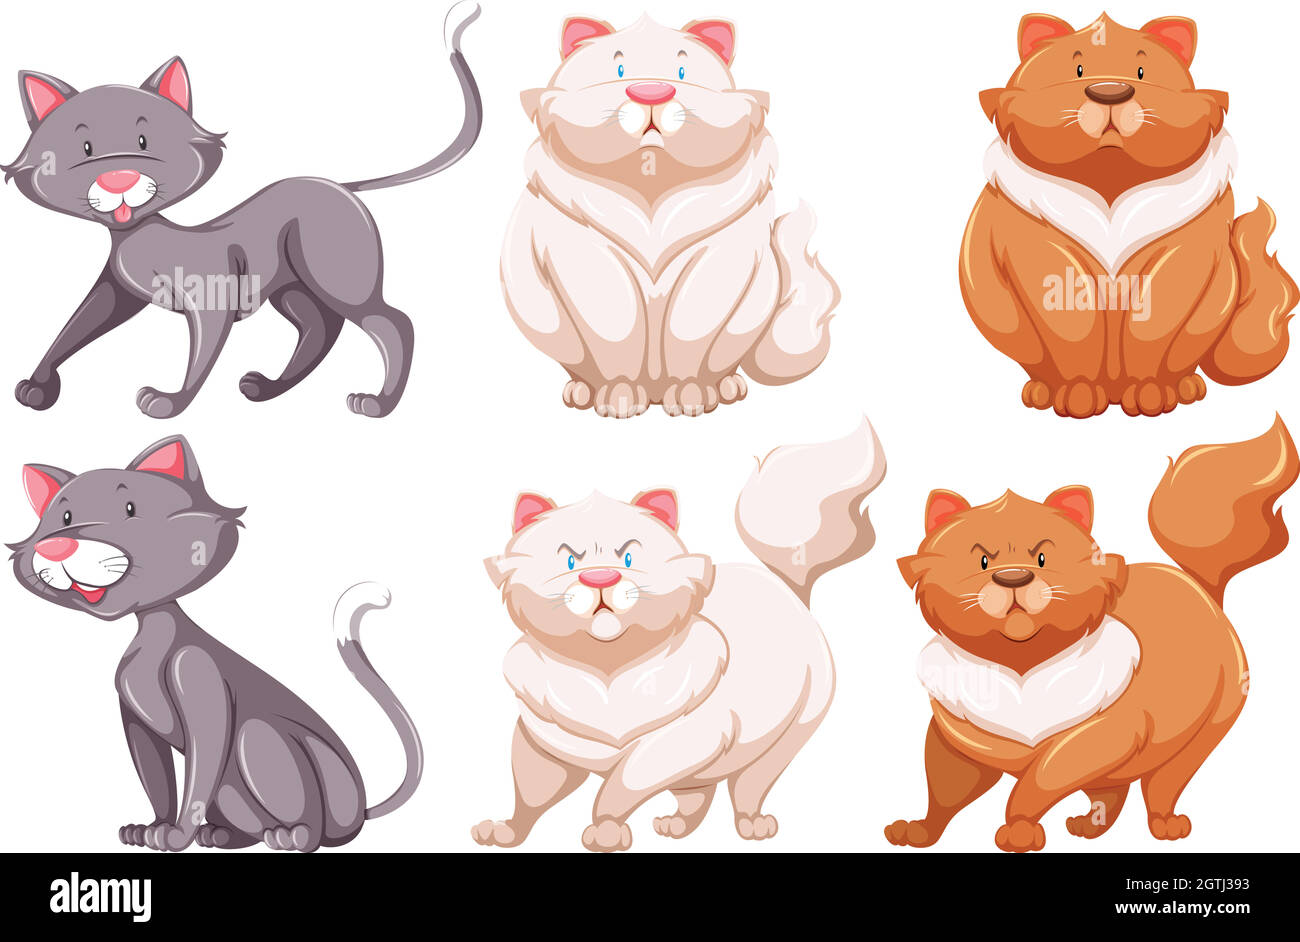 Different specie of cats Stock Vector